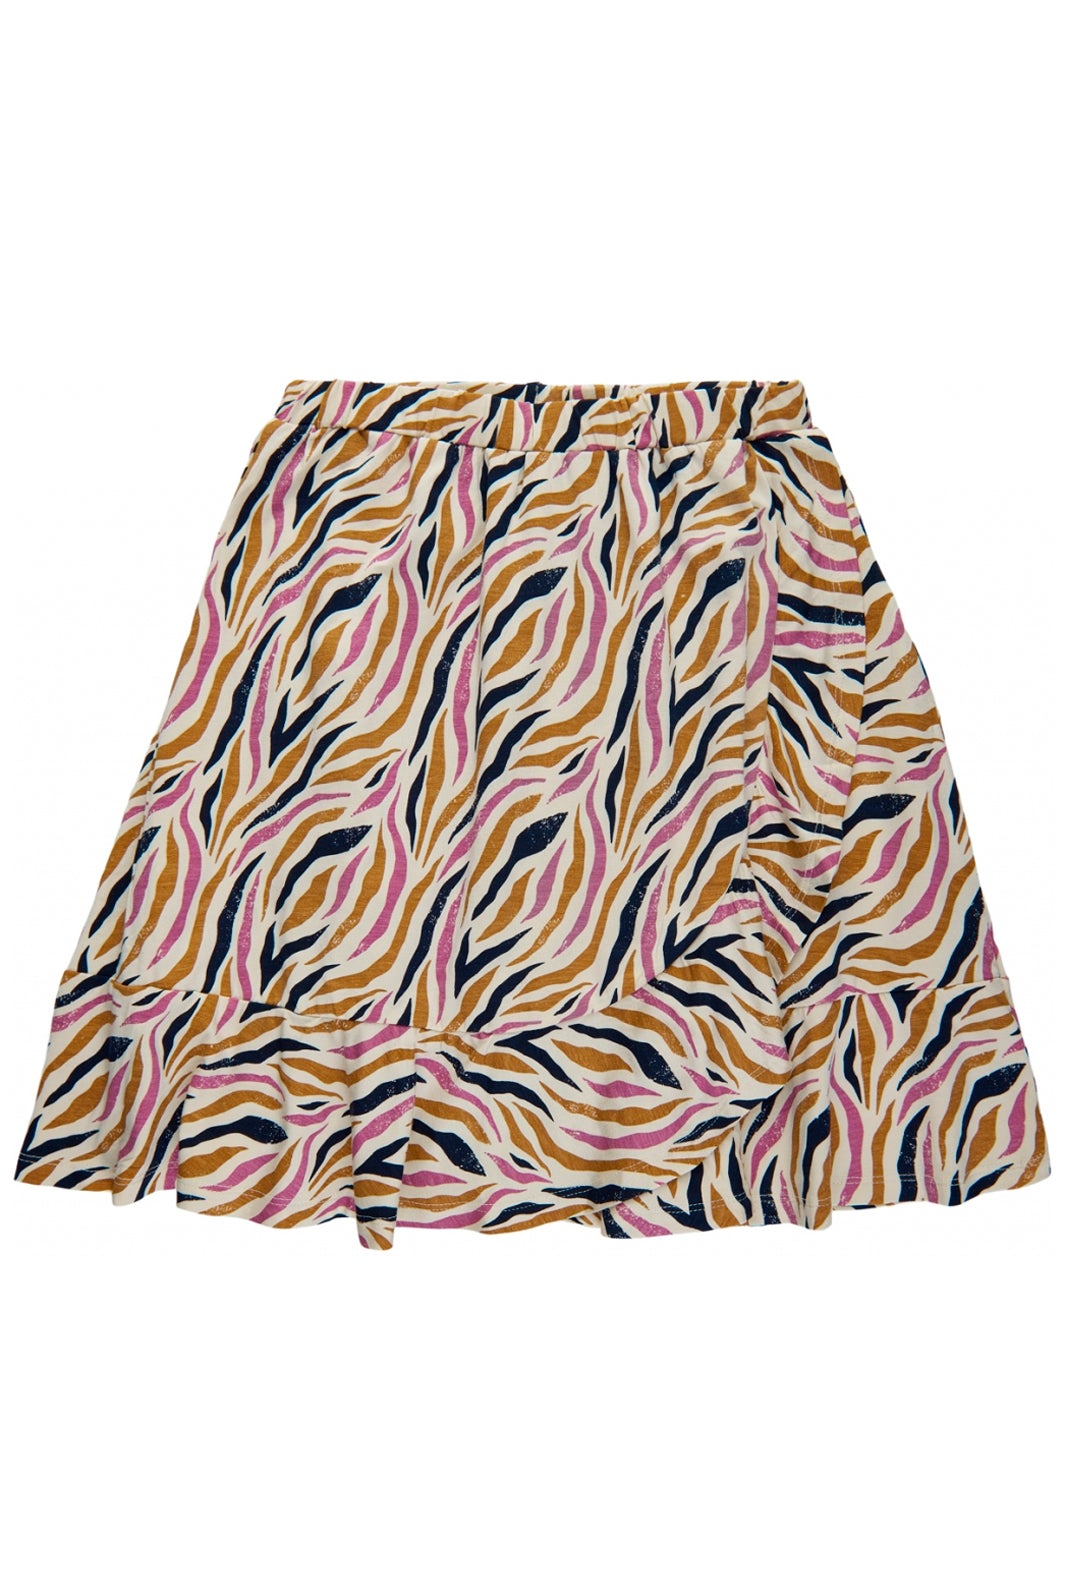 THE NEW - TnBeate Skirt - Tiger Aop Nederdele 